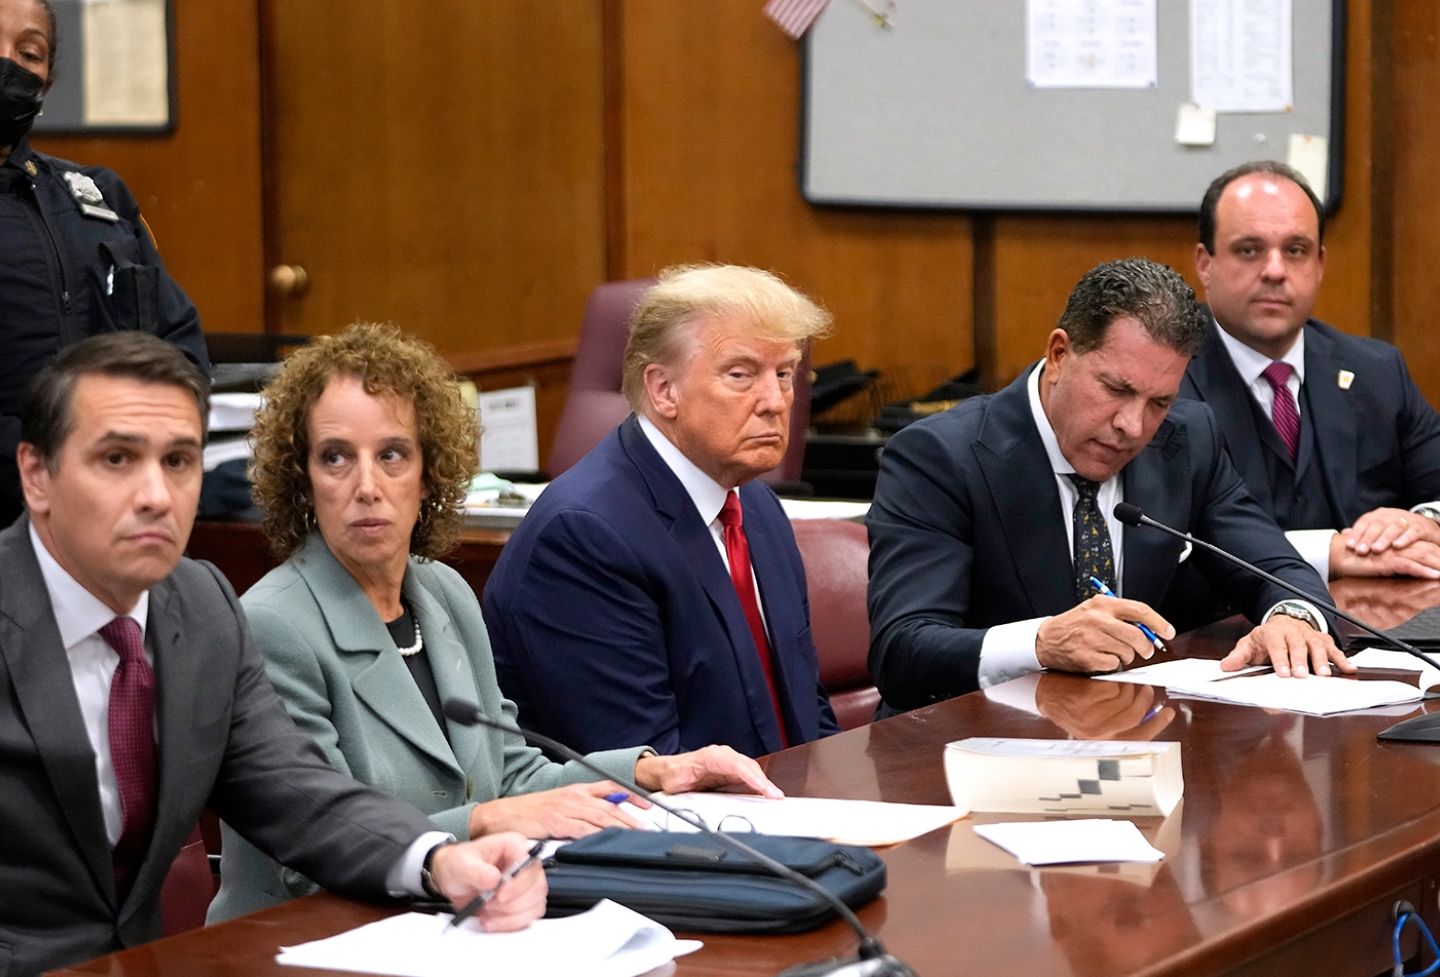 U.S. President Donald Trump sits with his attorneys